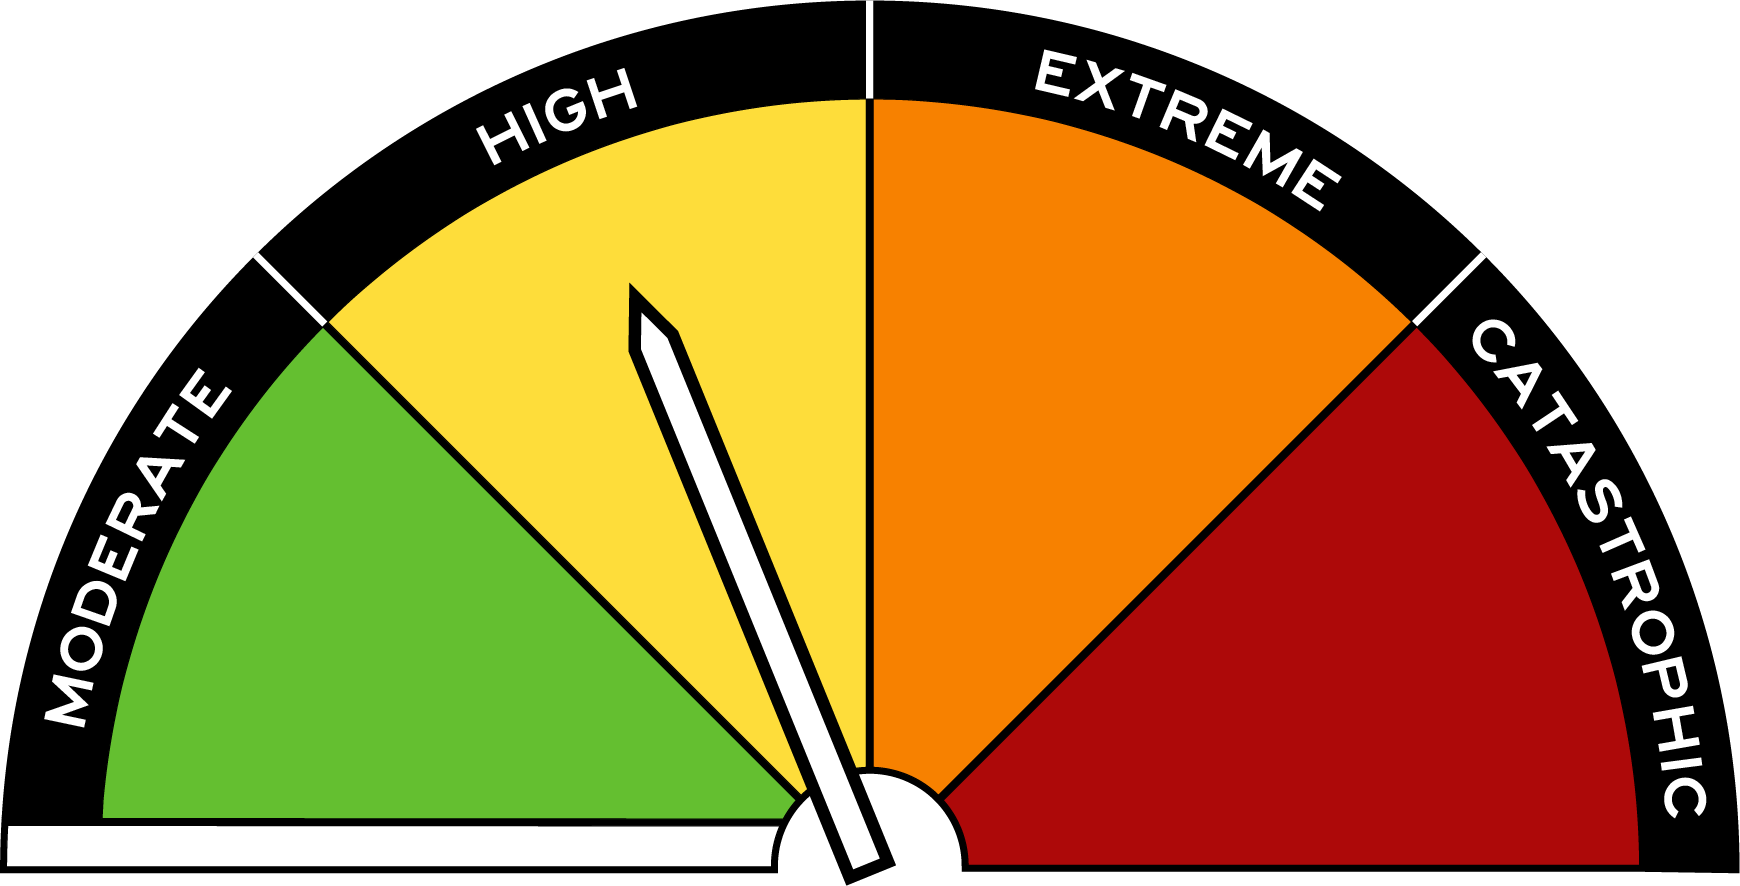 Fire danger ratings dial as represented on a road sign. Green is moderate. Yellow is high and in this picture fire danger is high. Orange is extreme. Red is catastrophic.